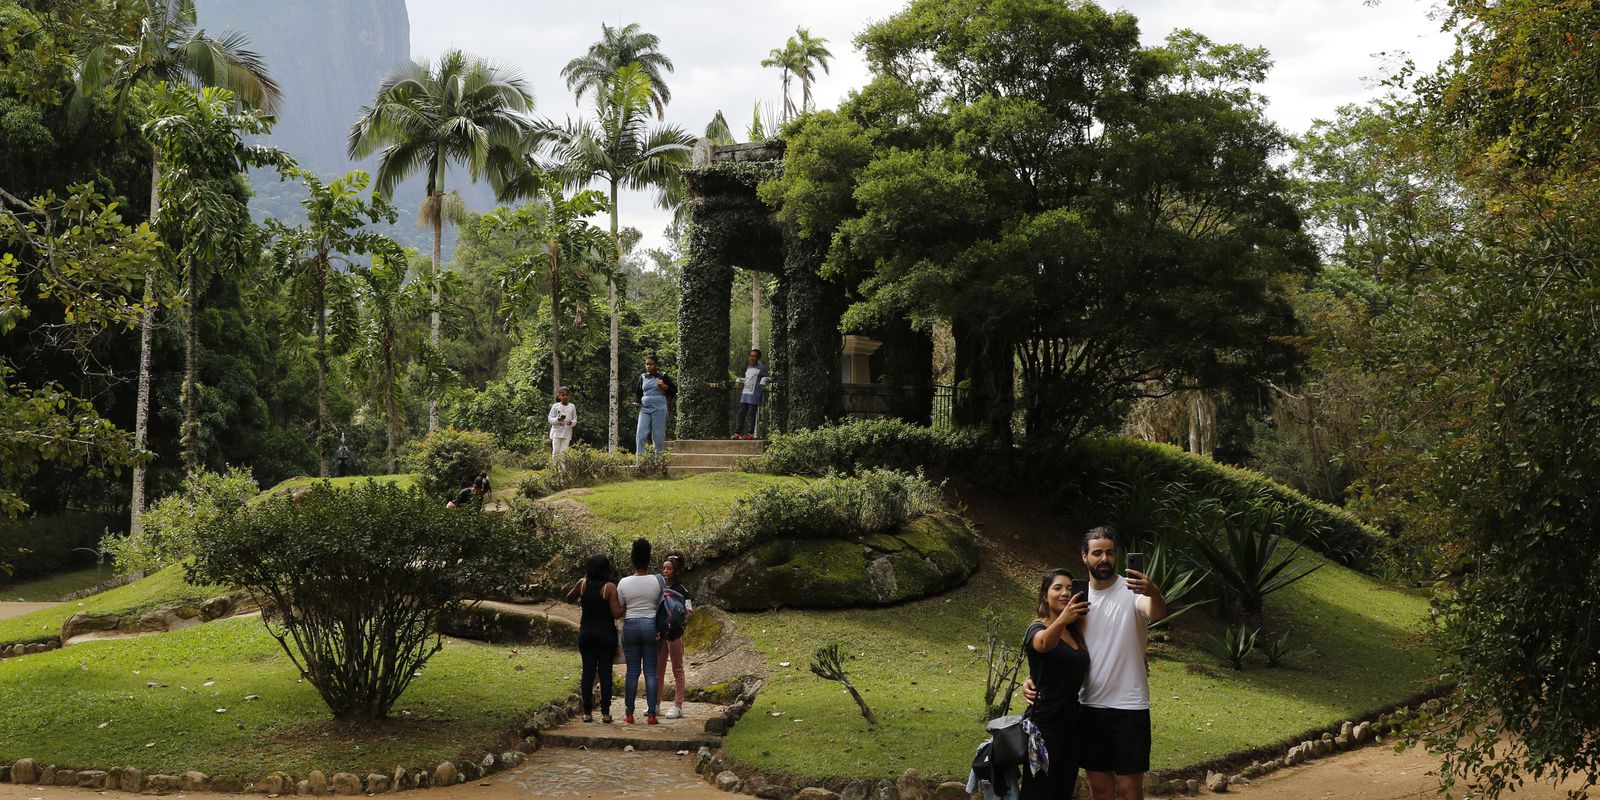 Botanical Garden completes 214 years trying to recover public